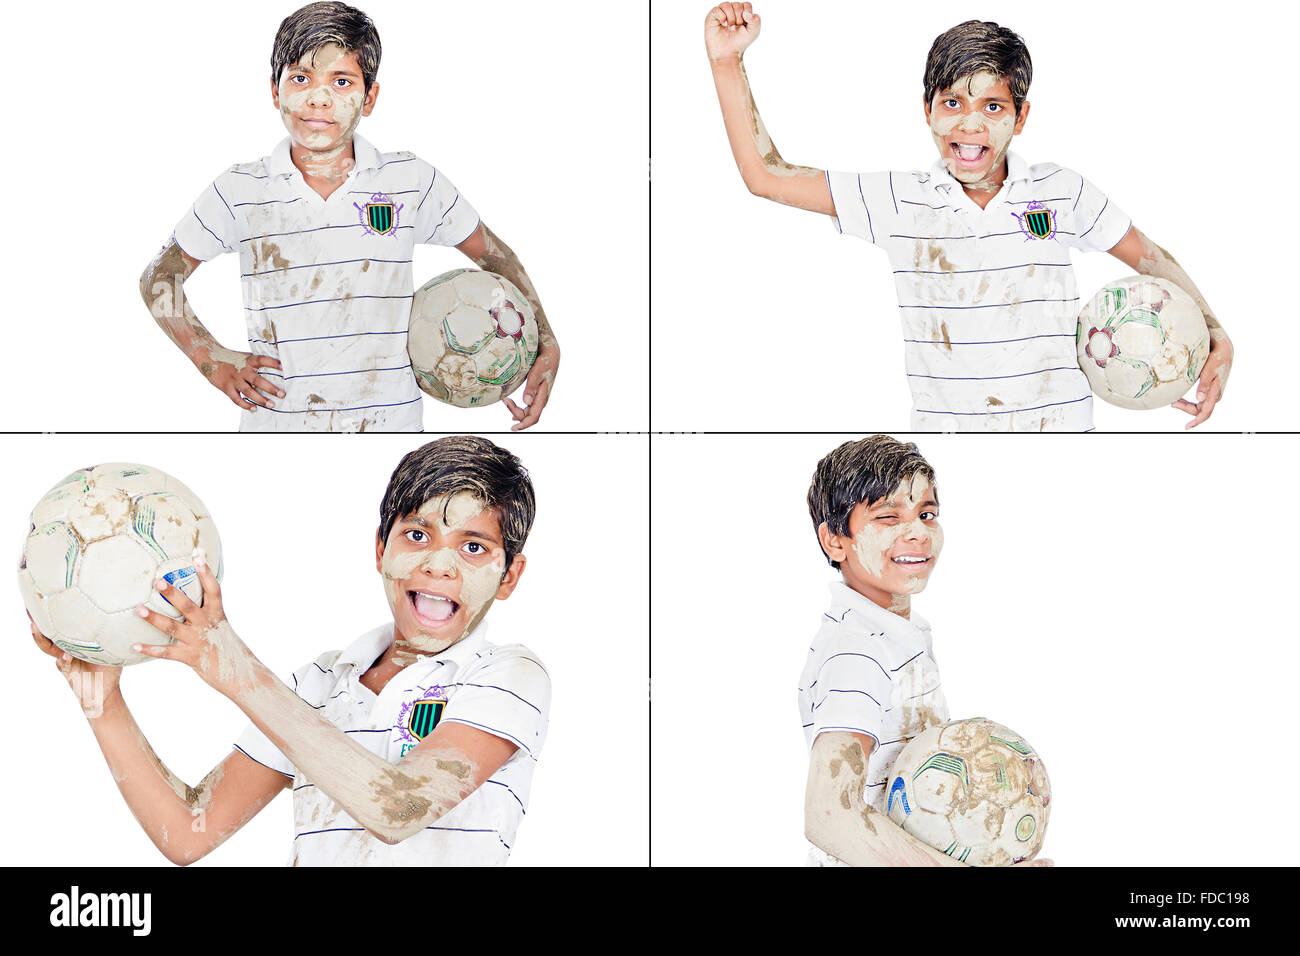 Happy 1 Indian Kid Boy Playing Football Facial Expression Montage Picture Stock Photo